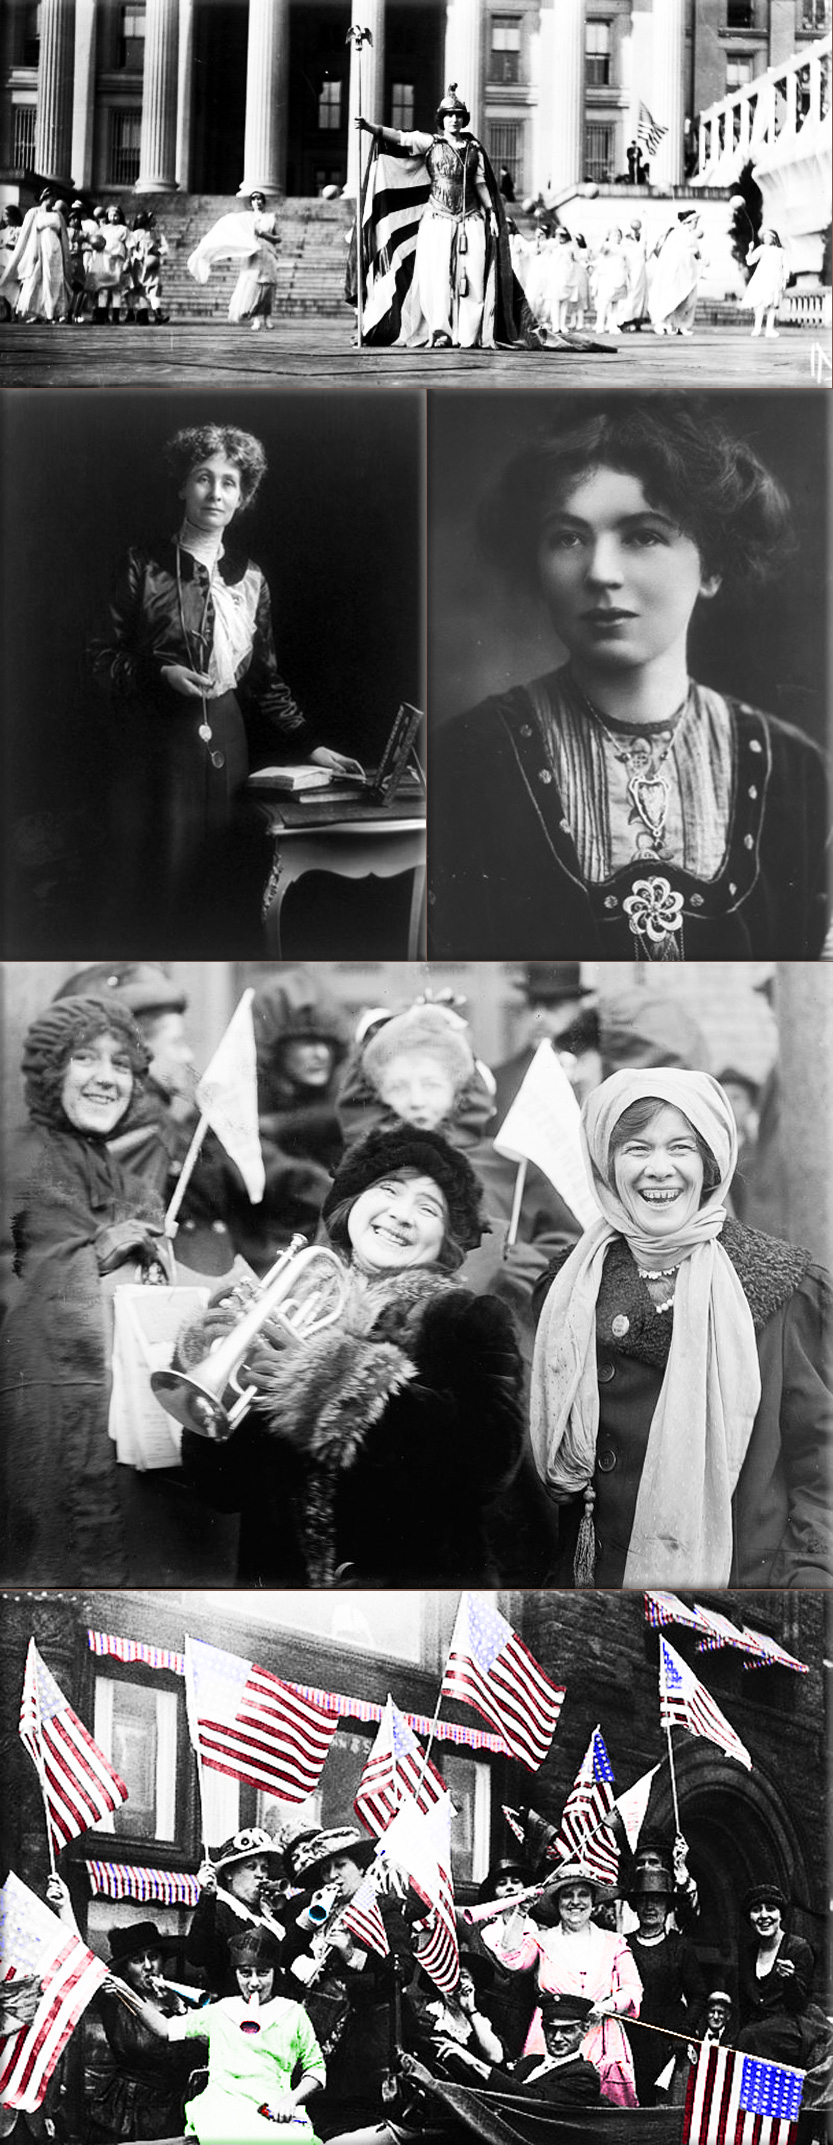 Suffragettes were members of women's suffrage (right to vote) movements in the late 19th and 20th century, particularly in the United Kingdom and United States